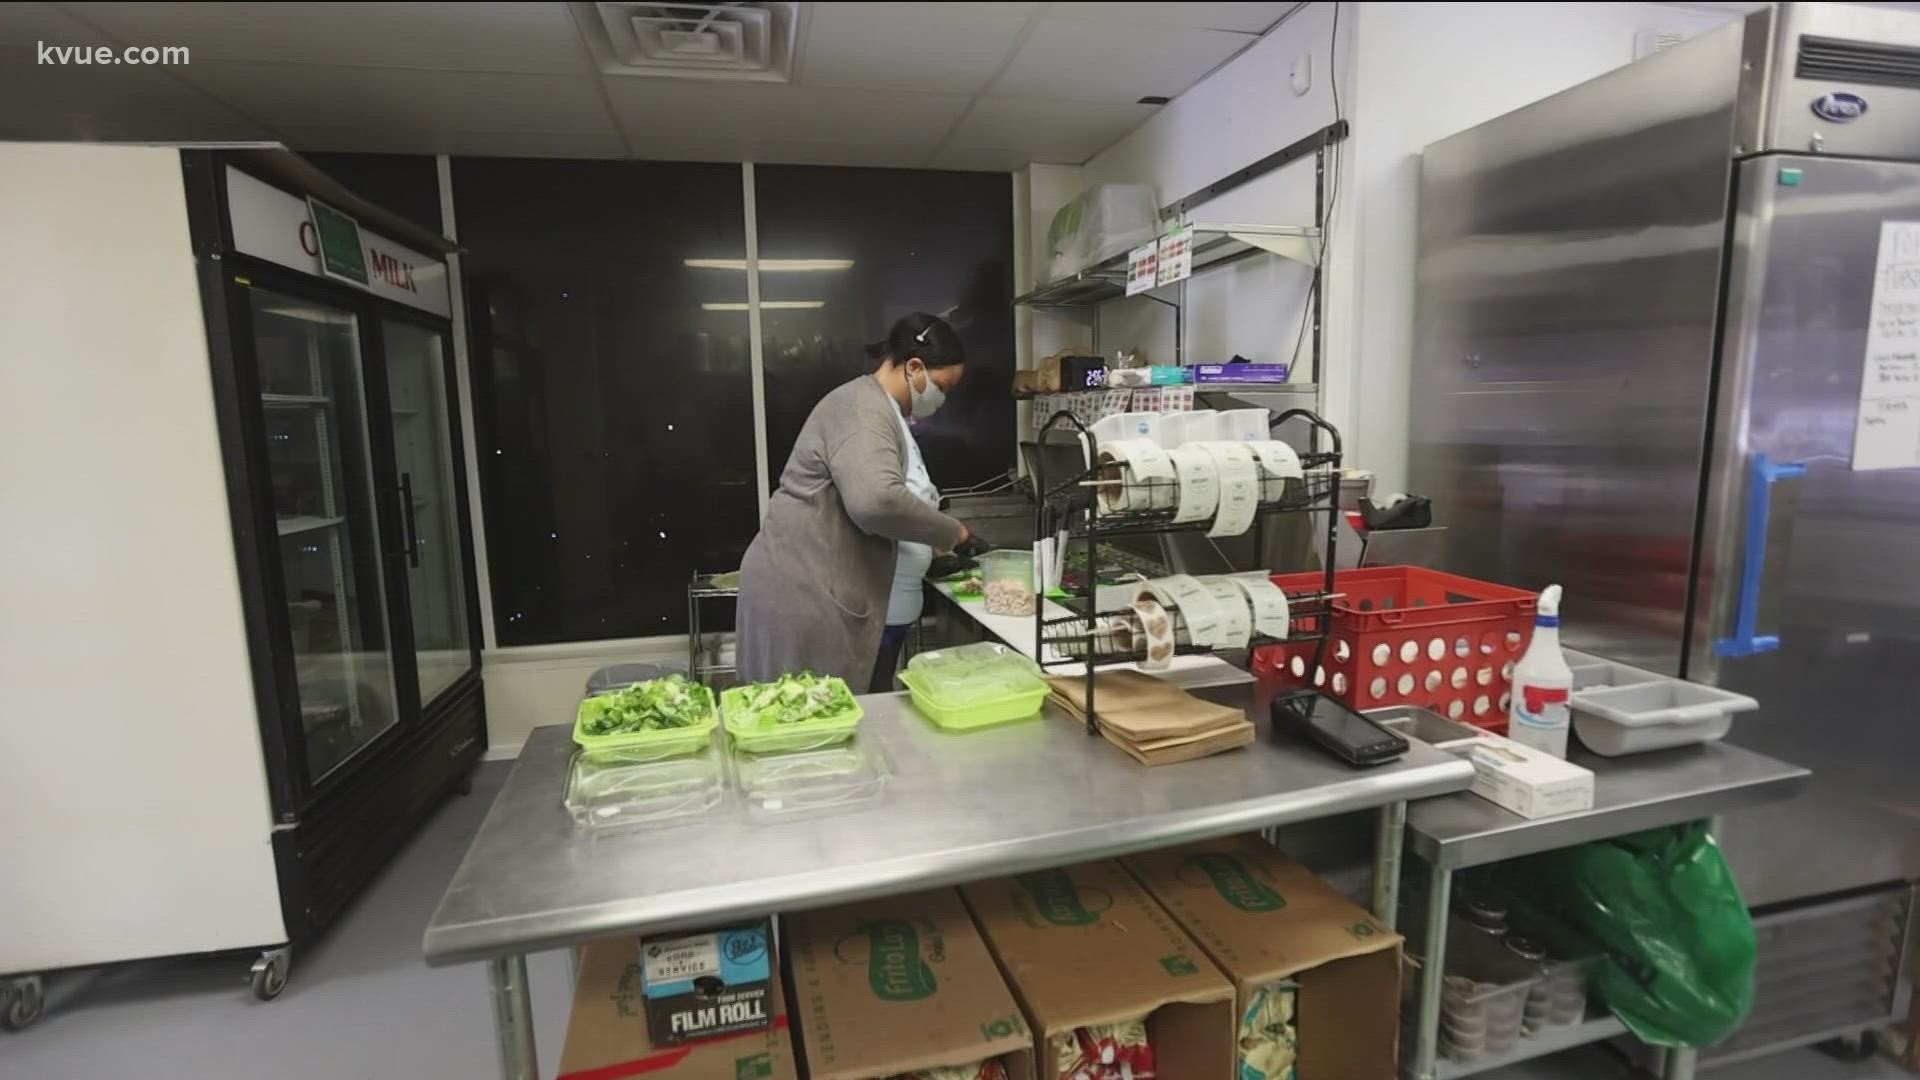 Sharon Mays is serving up healthy food at an affordable price in hopes of reaching more people.